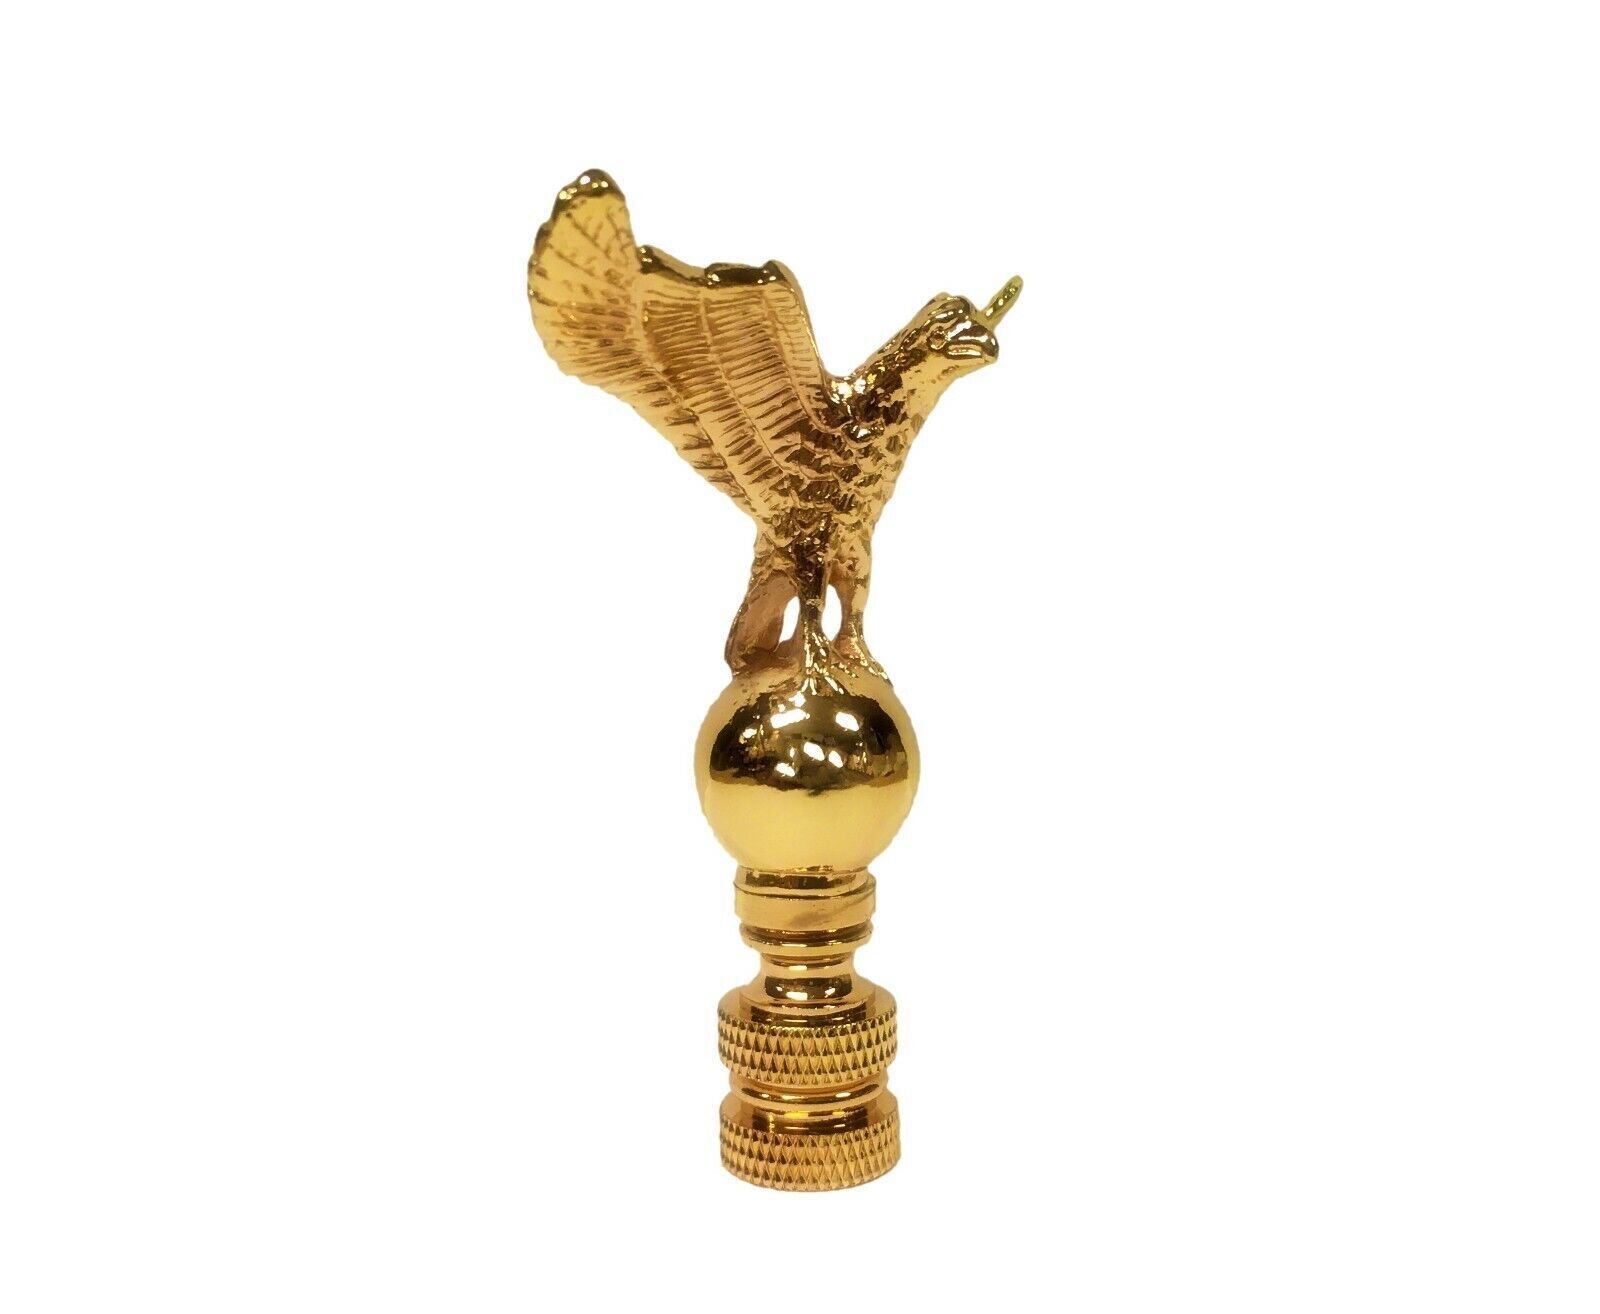 Lamp Finial-EAGLE ON ORB-Polished Brass Finish, Highly detailed metal casting